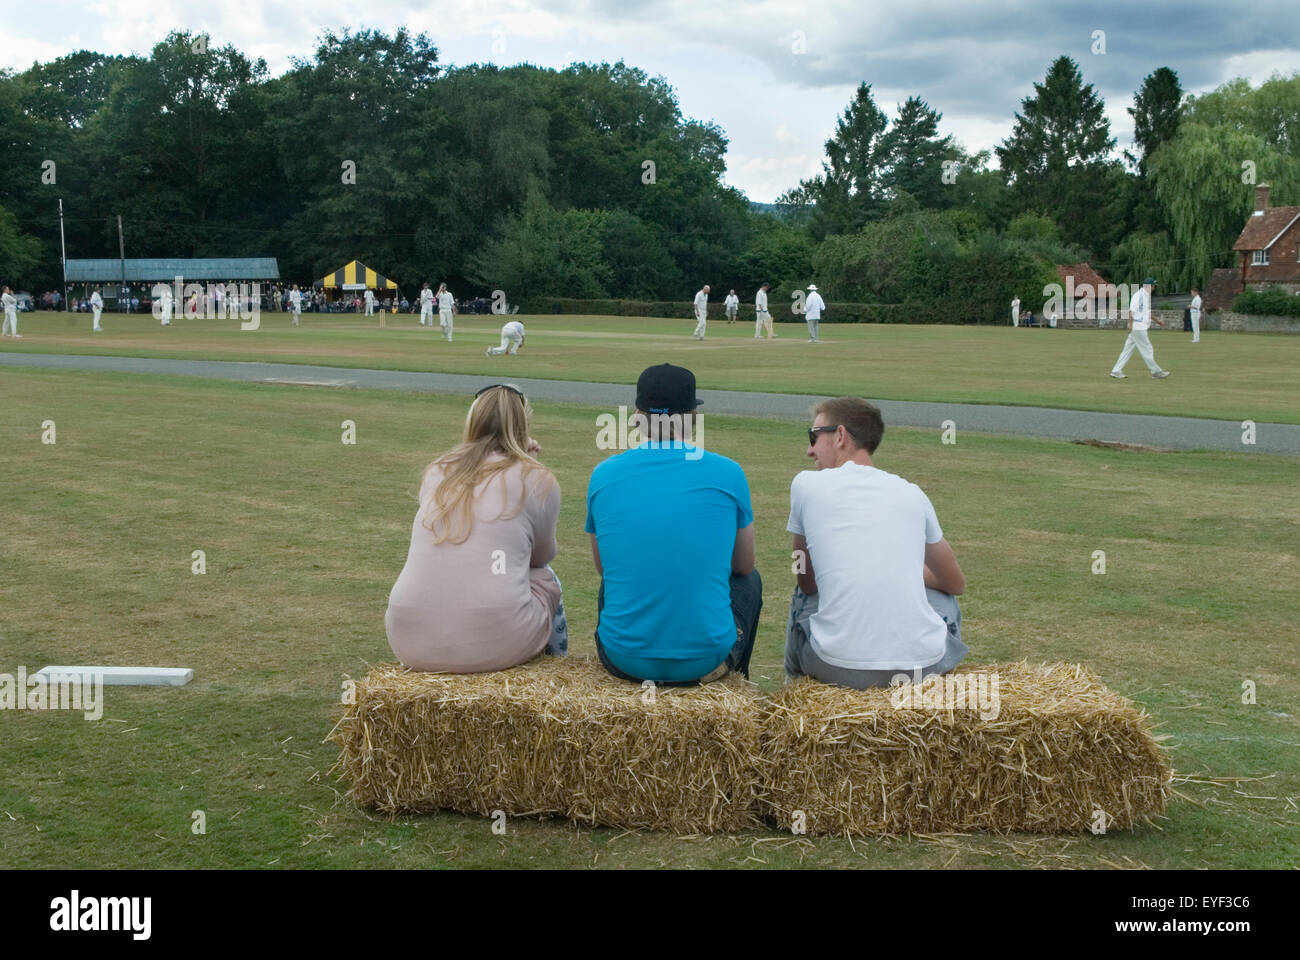 Lazy summers afternoon, people relaxed and watching a game of cricket 2015  2010s Sussex Nr Petworth West Sussex, England UK HOMER SYKES Stock Photo